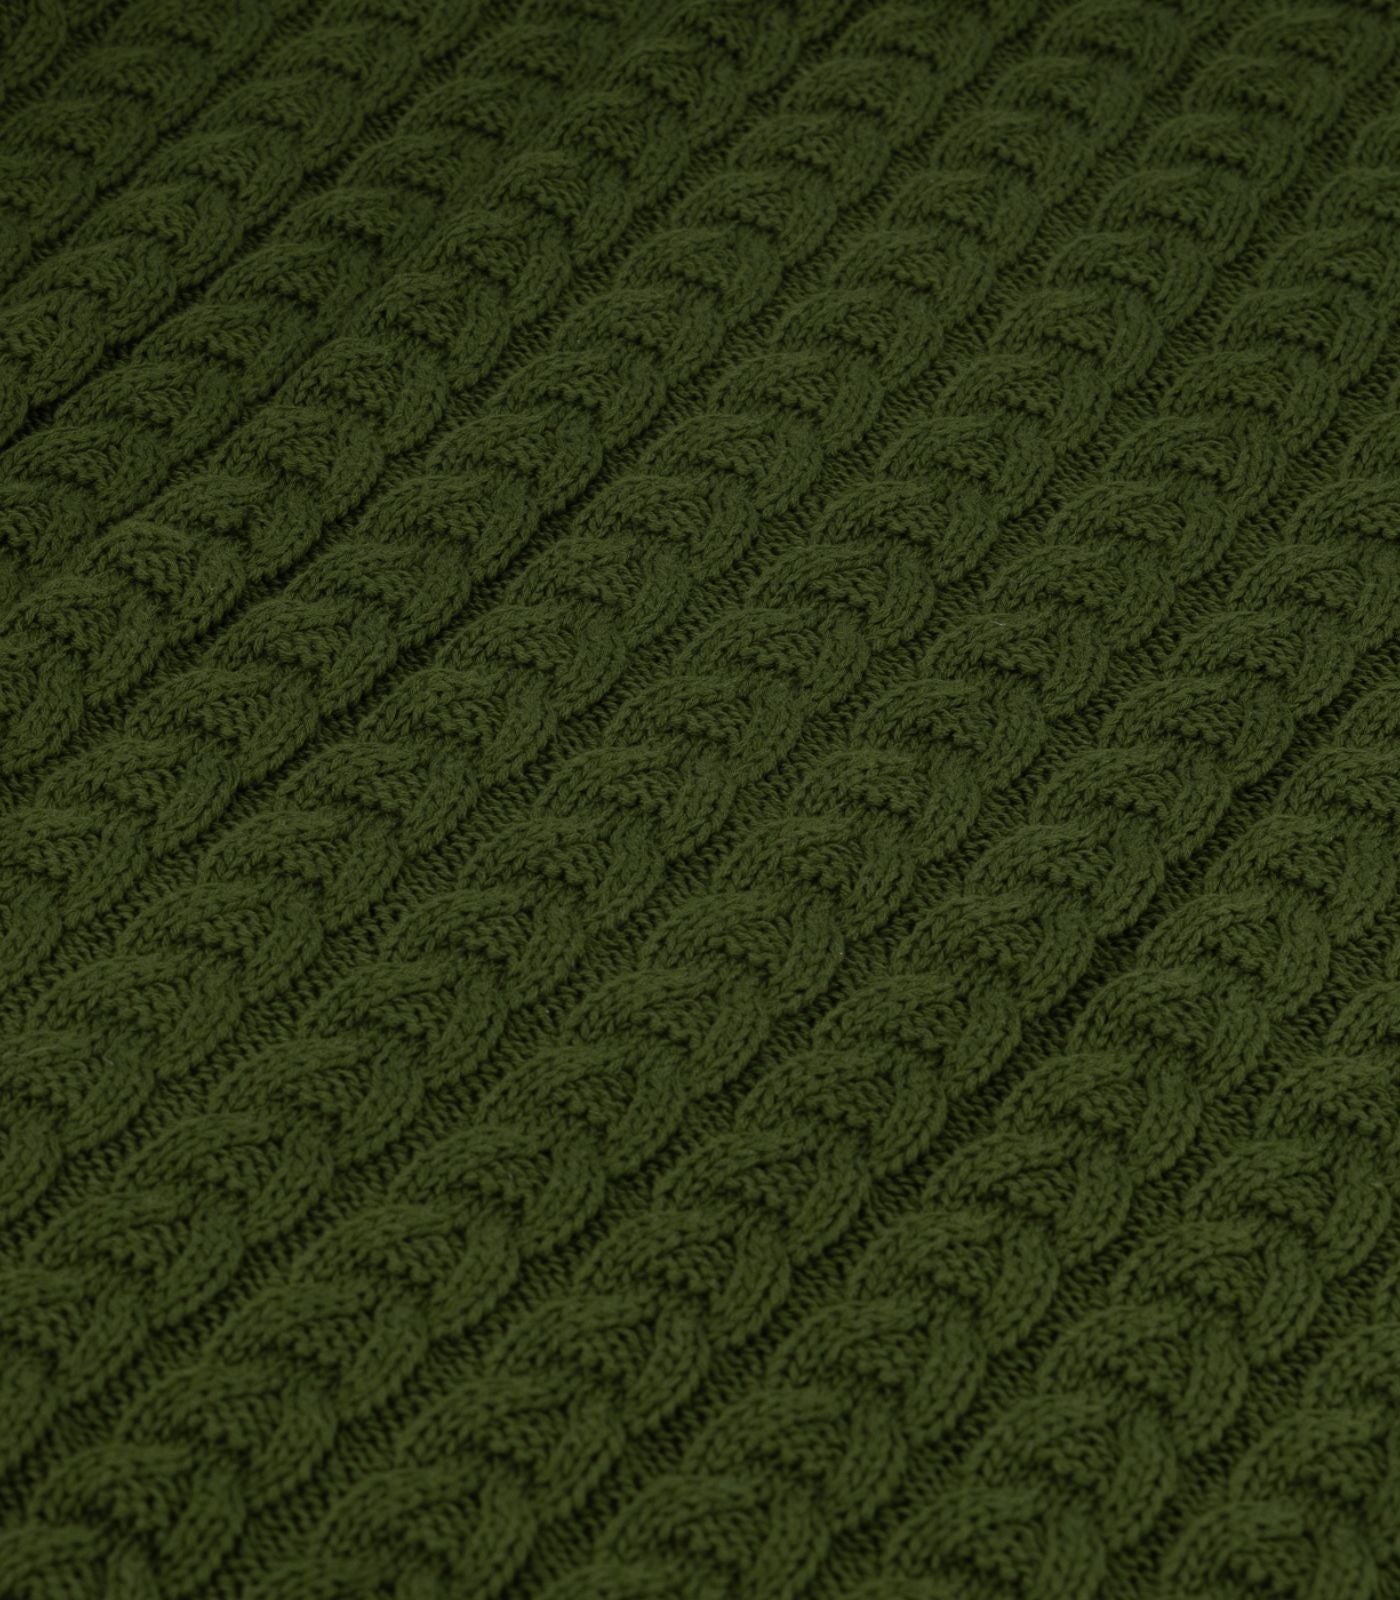 Bhumi Organic Cotton - Braided Cable Knit Throw - Chive